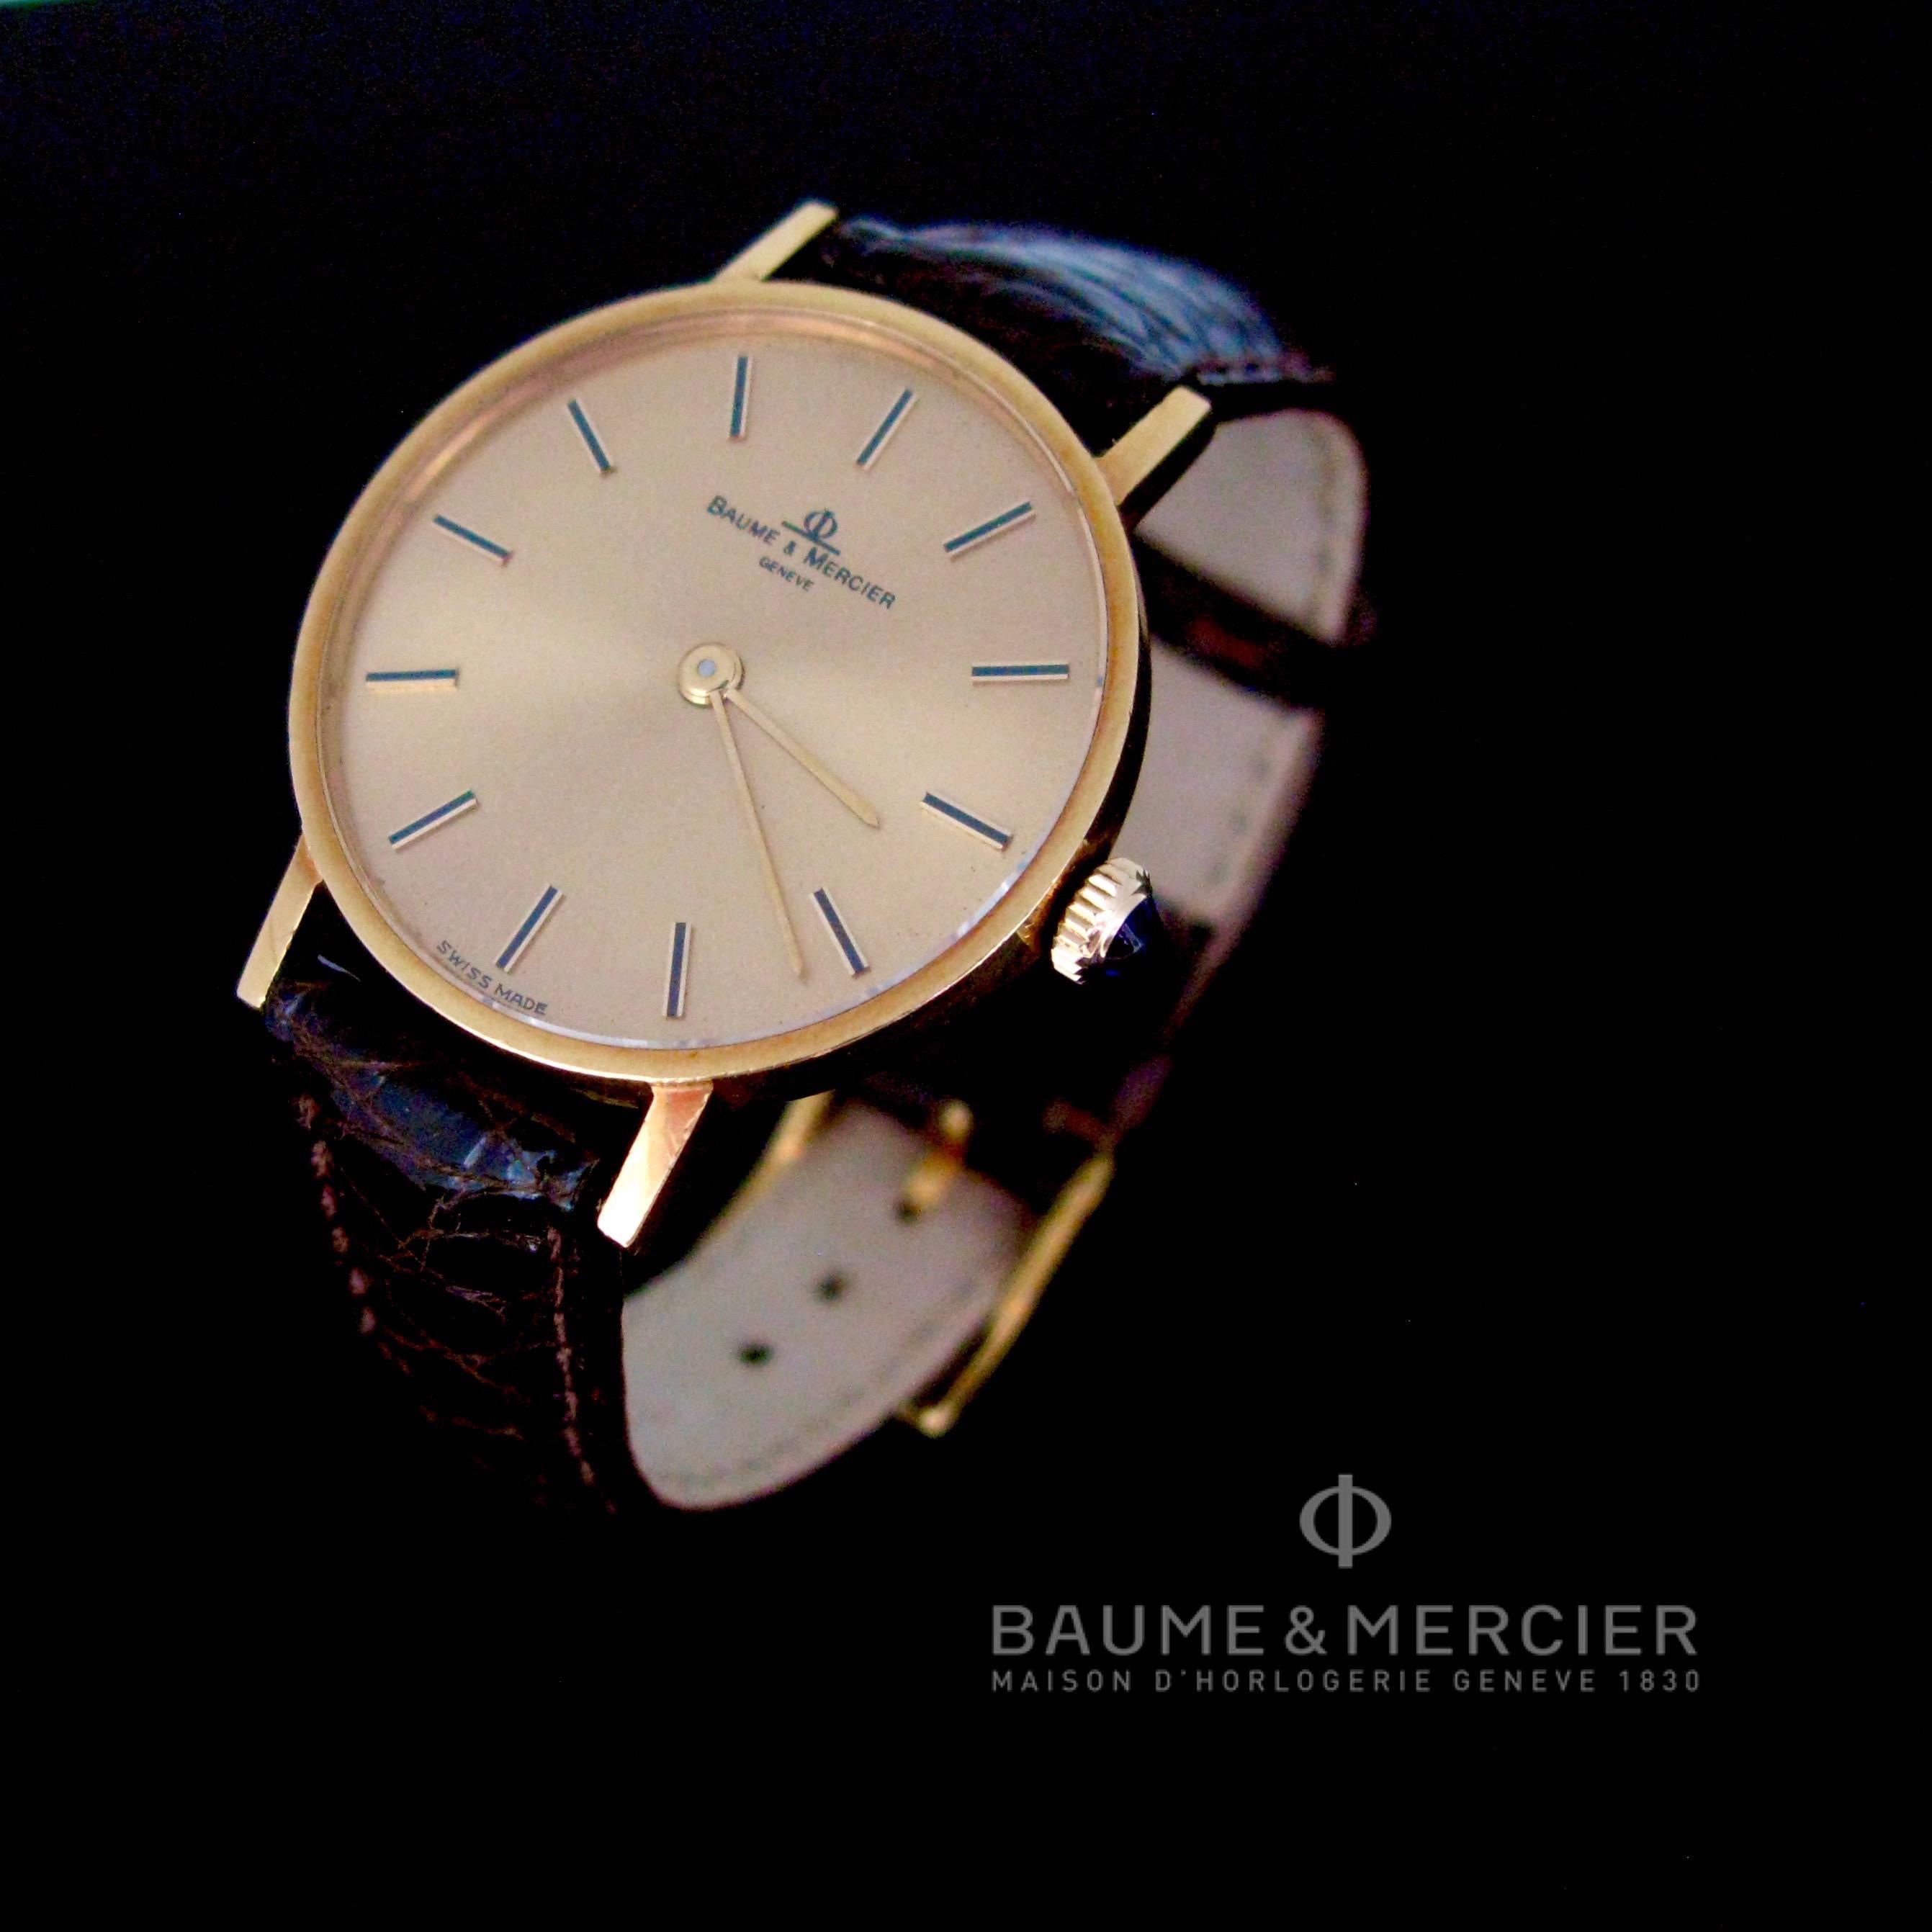 This Baume & Mercier 35121 watch is made in 18K yellow gold. The movement is a manual winding Caliber 1050. It is in good condition and works perfectly. The strap is genuine leather. It comes with its original box.

Total Weight:	28.12